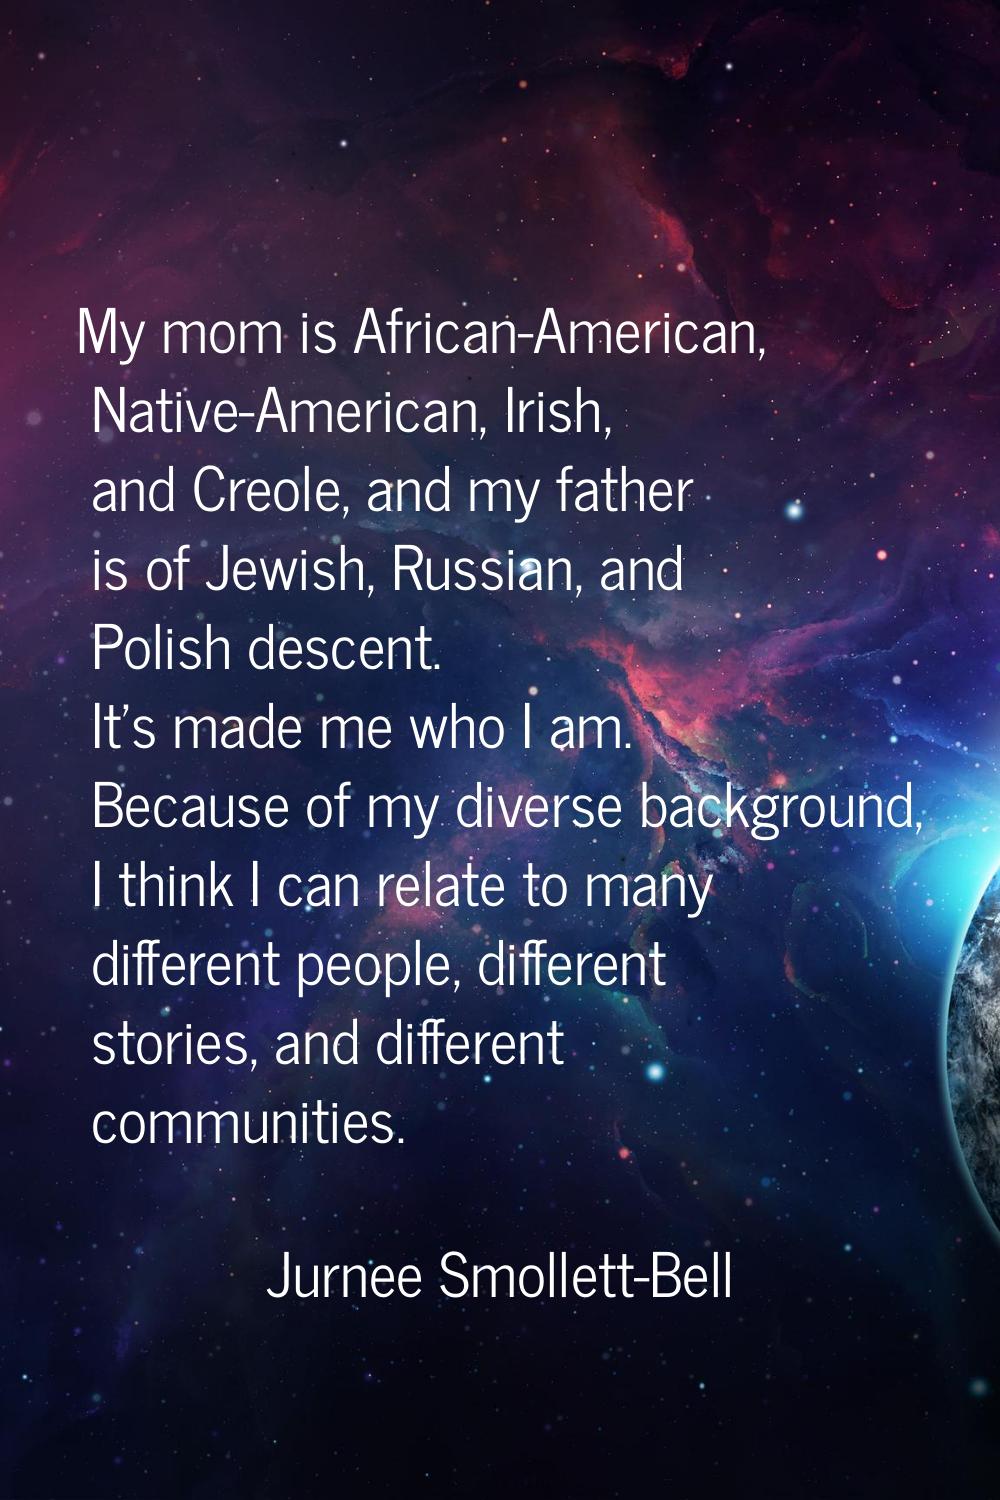 My mom is African-American, Native-American, Irish, and Creole, and my father is of Jewish, Russian